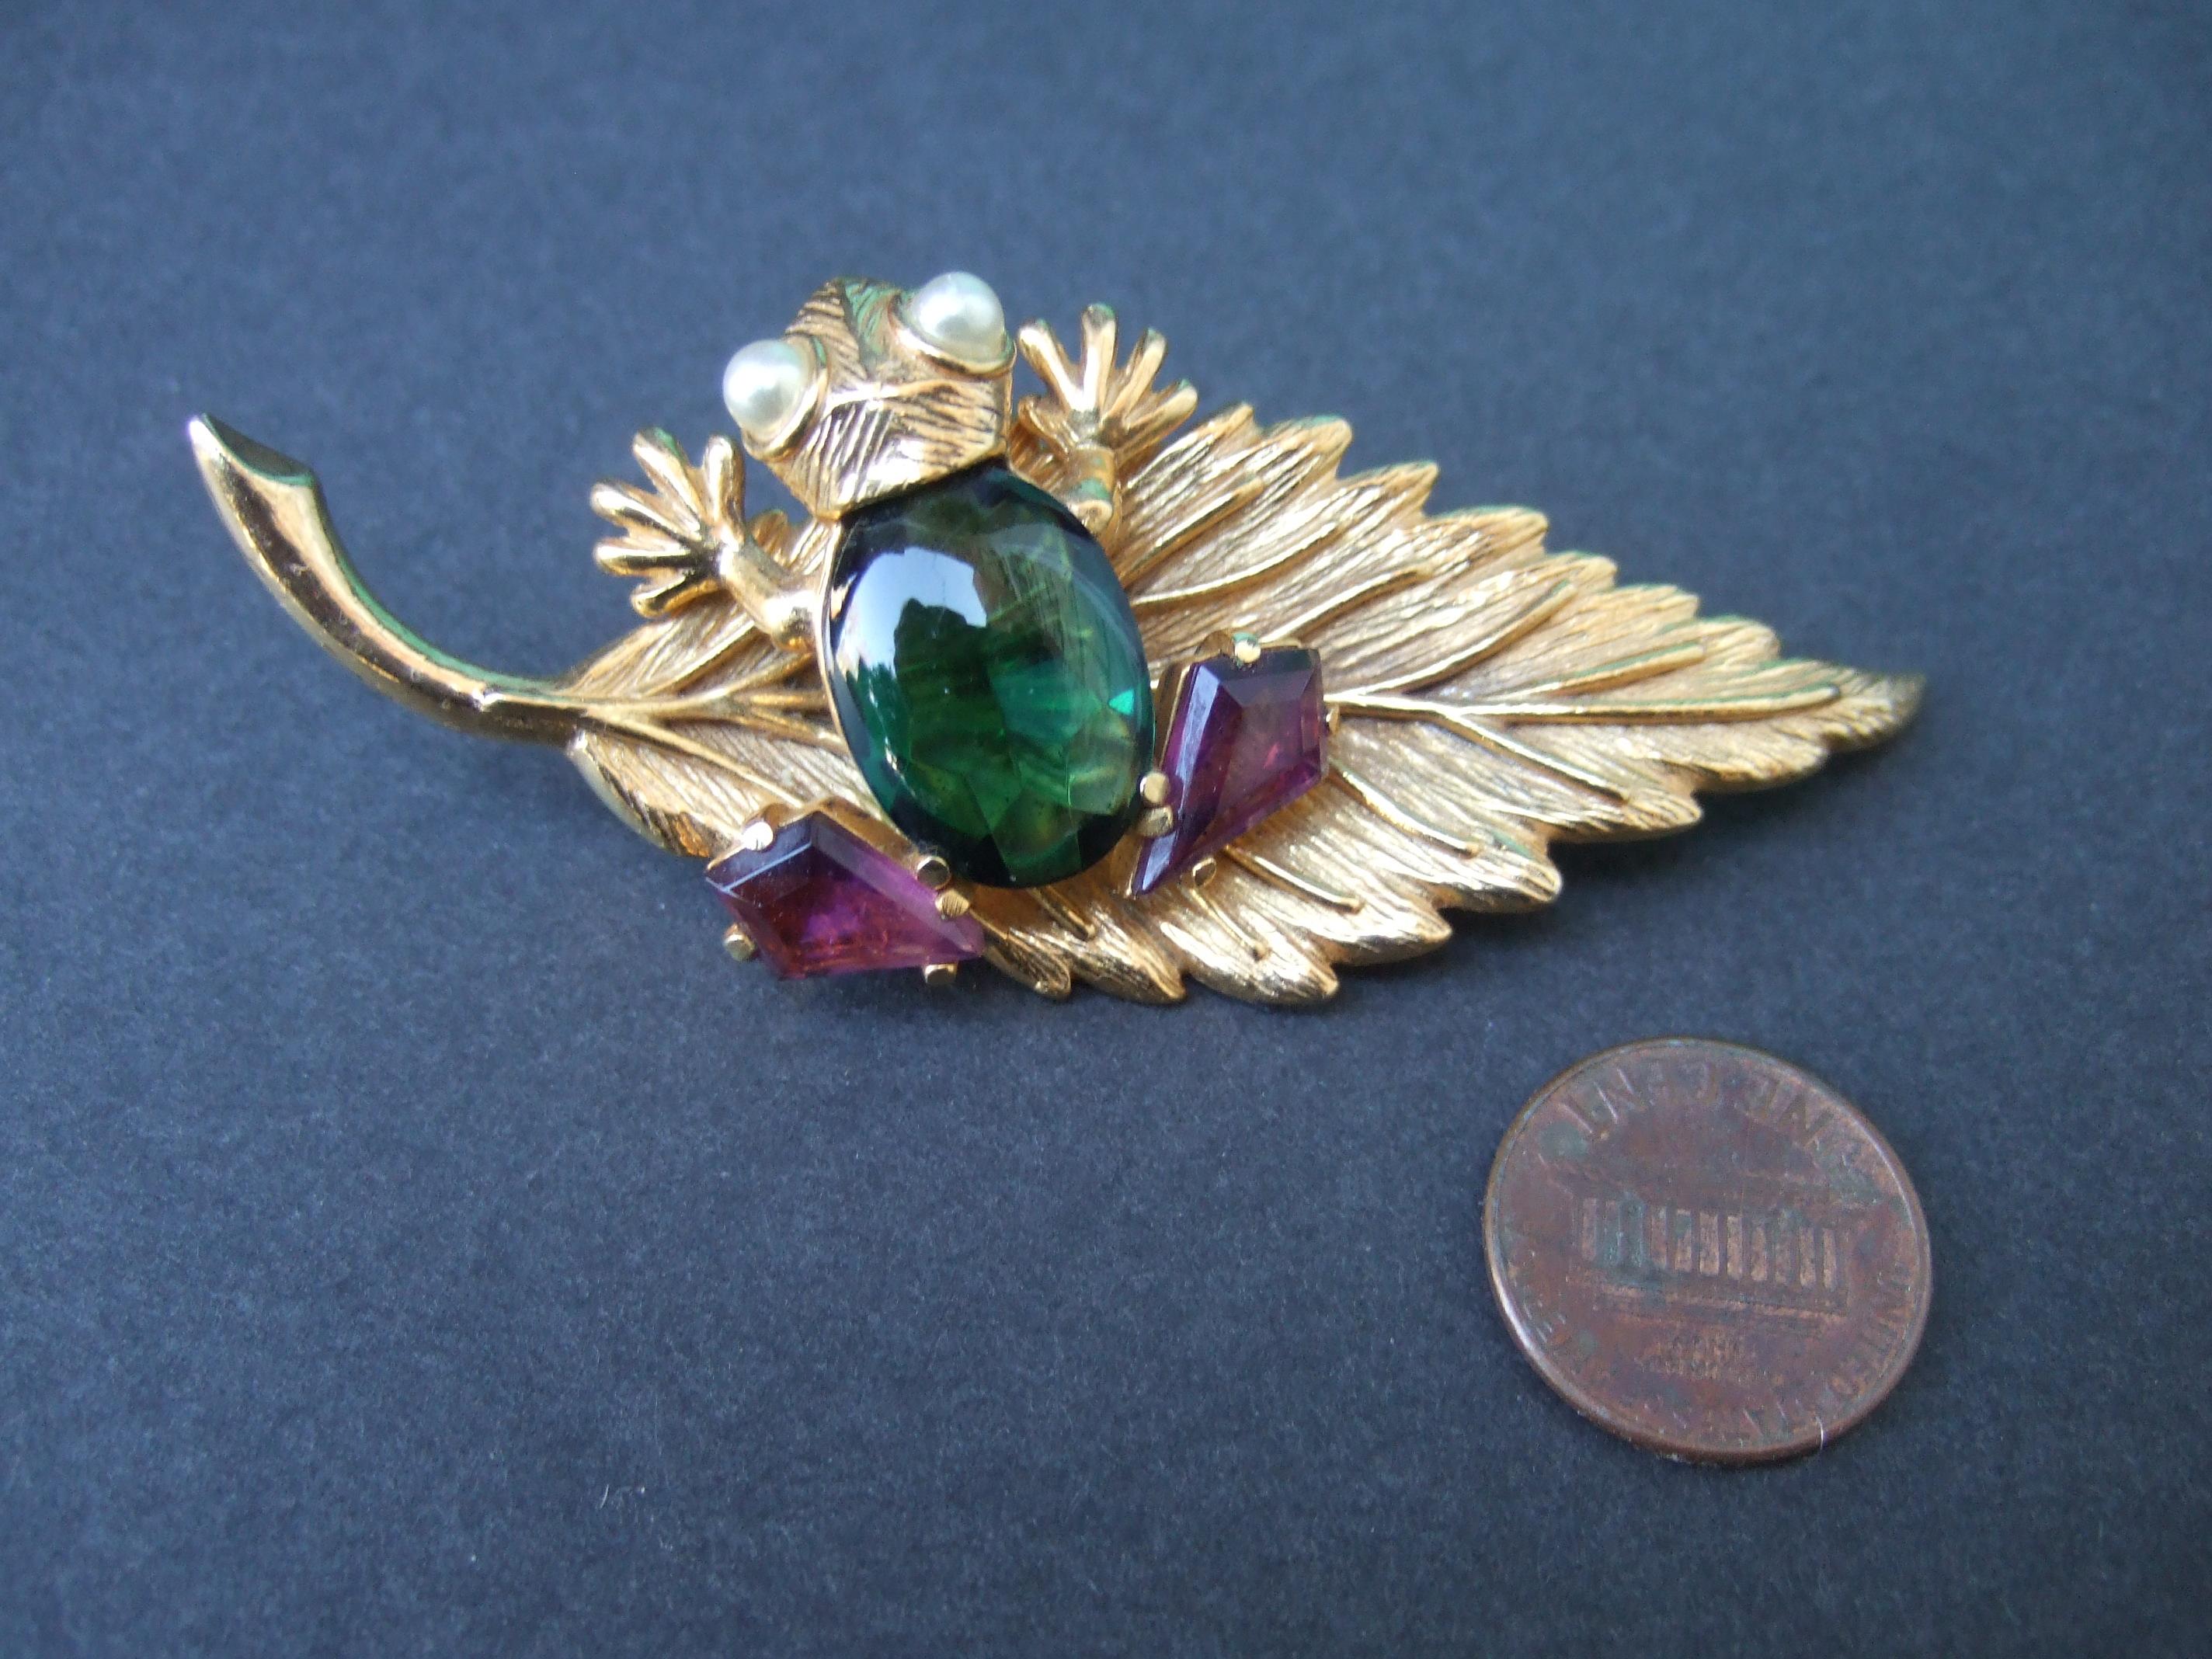 Schiaparelli Rare Charming Jeweled Frog Brooch c 1960 For Sale 2